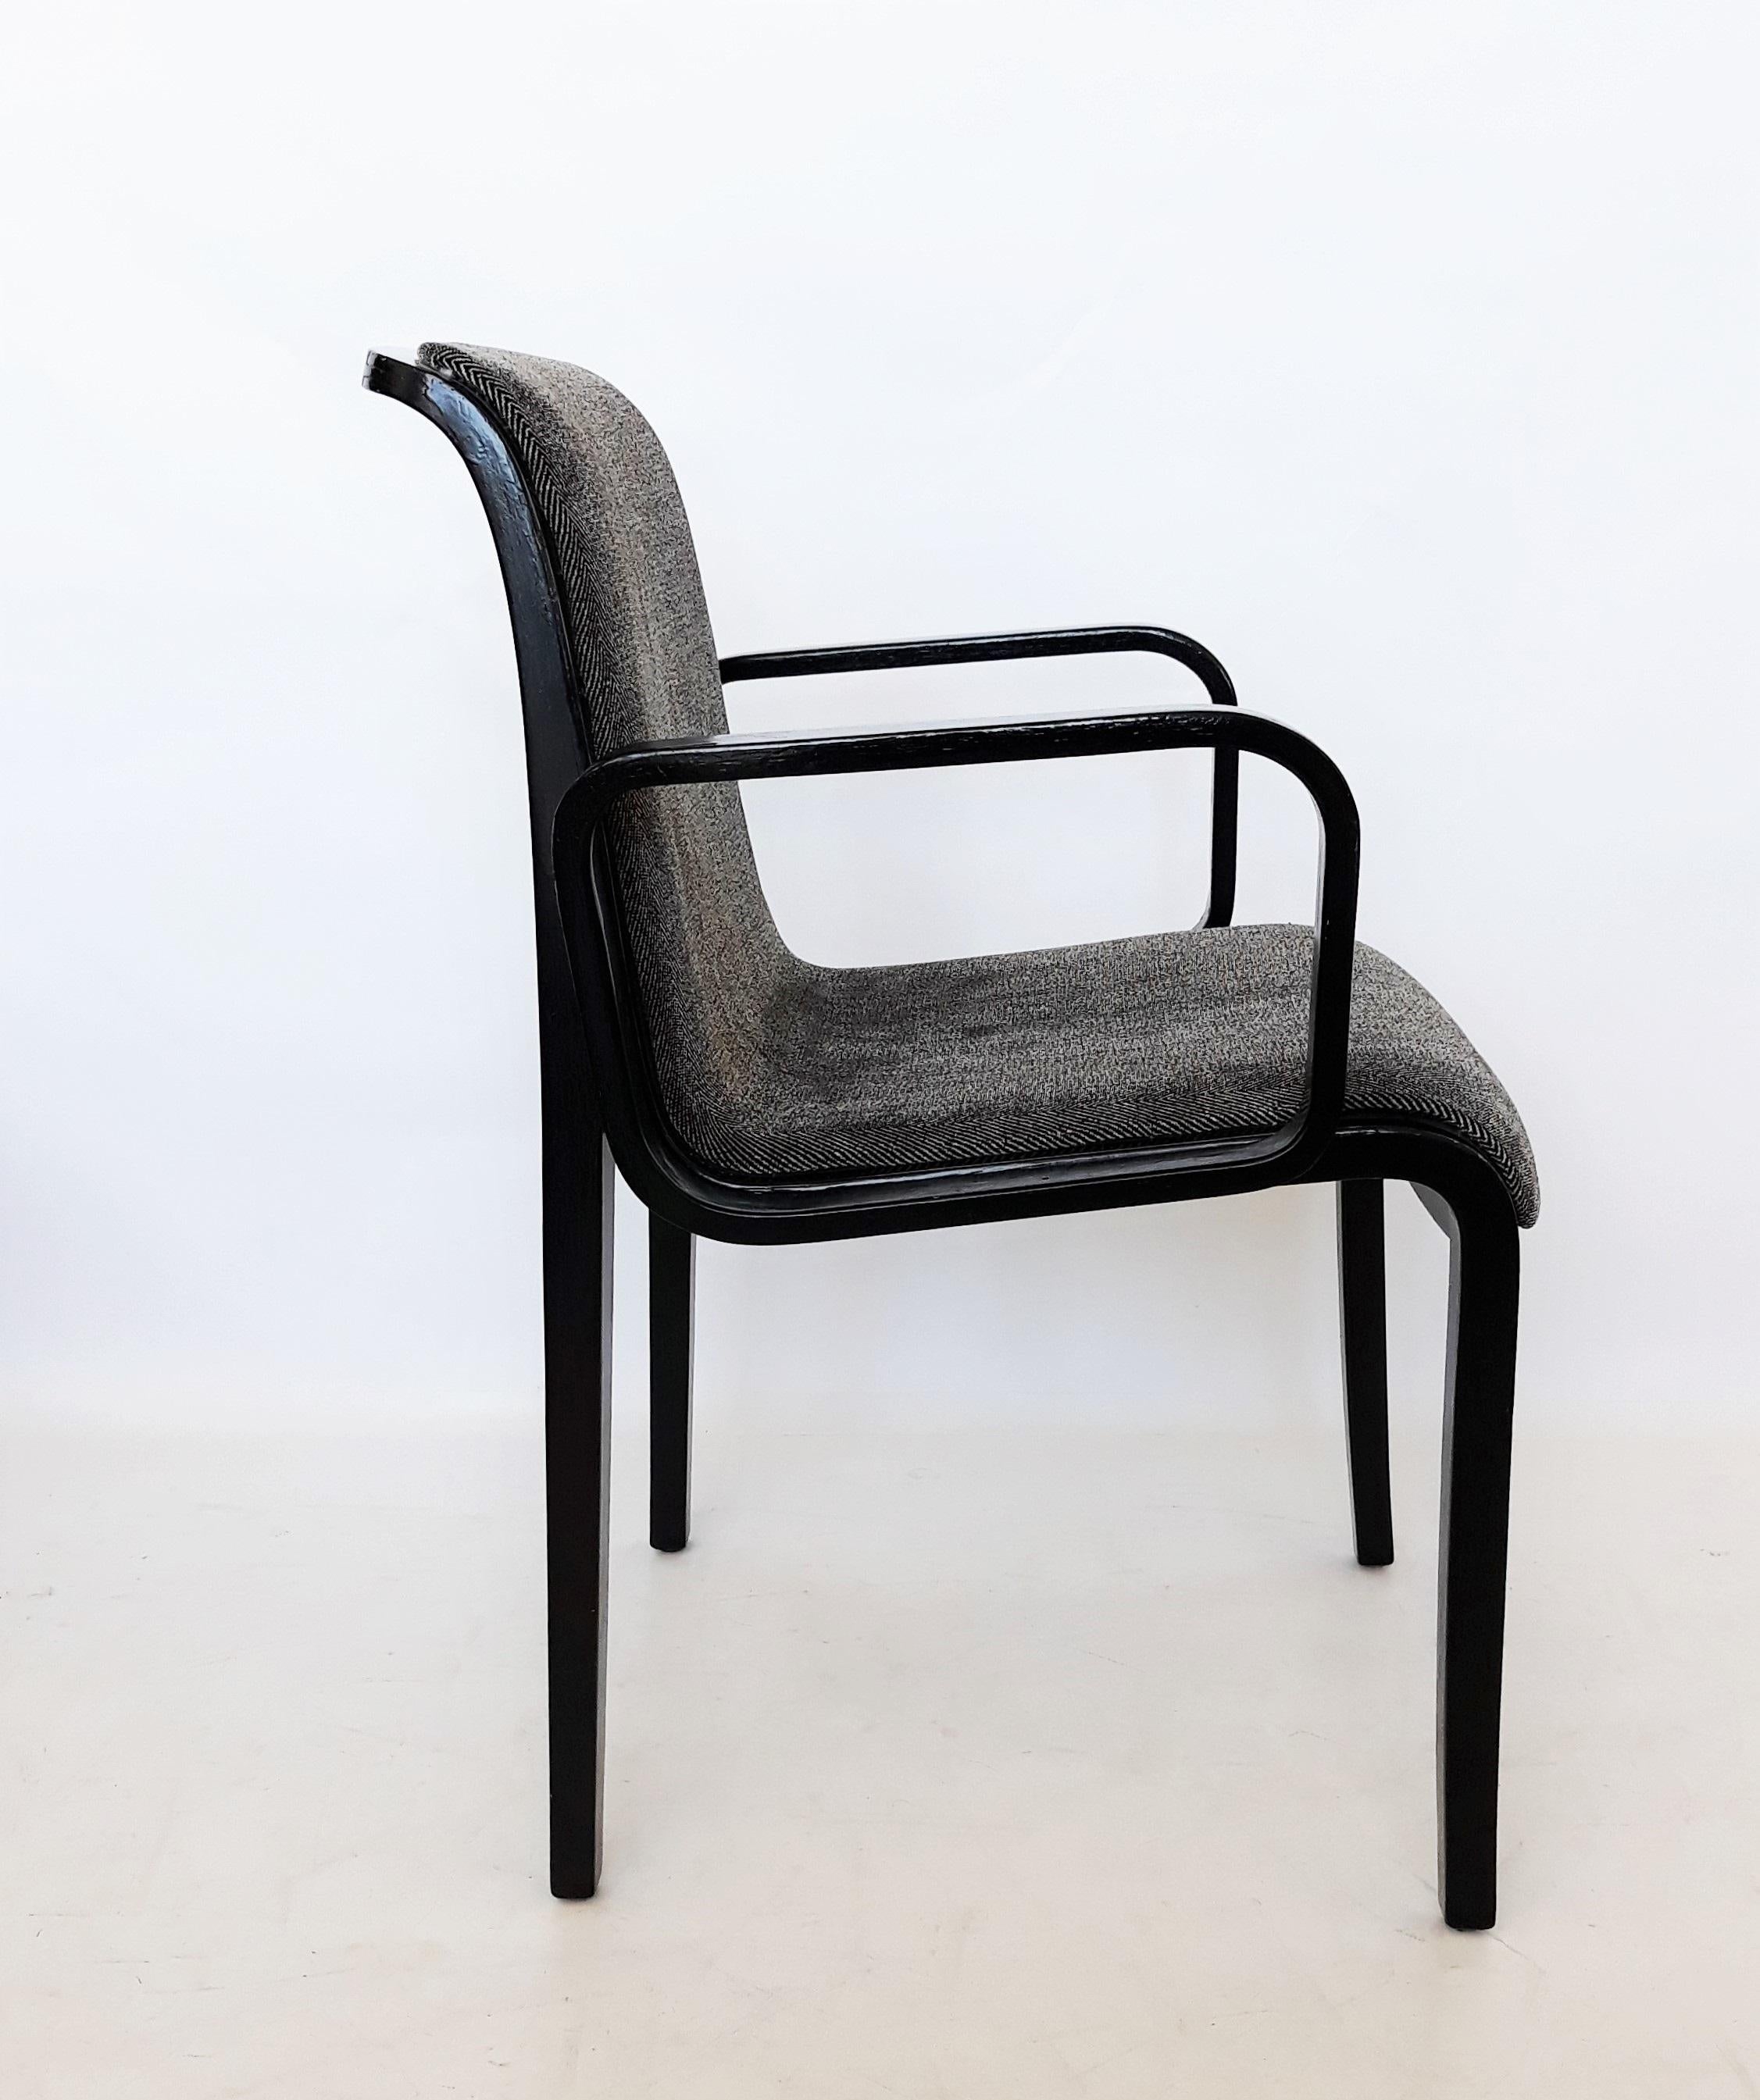 Four Bill Stephens For Knoll Black Lacquered Armchairs In Good Condition For Sale In Dallas, TX